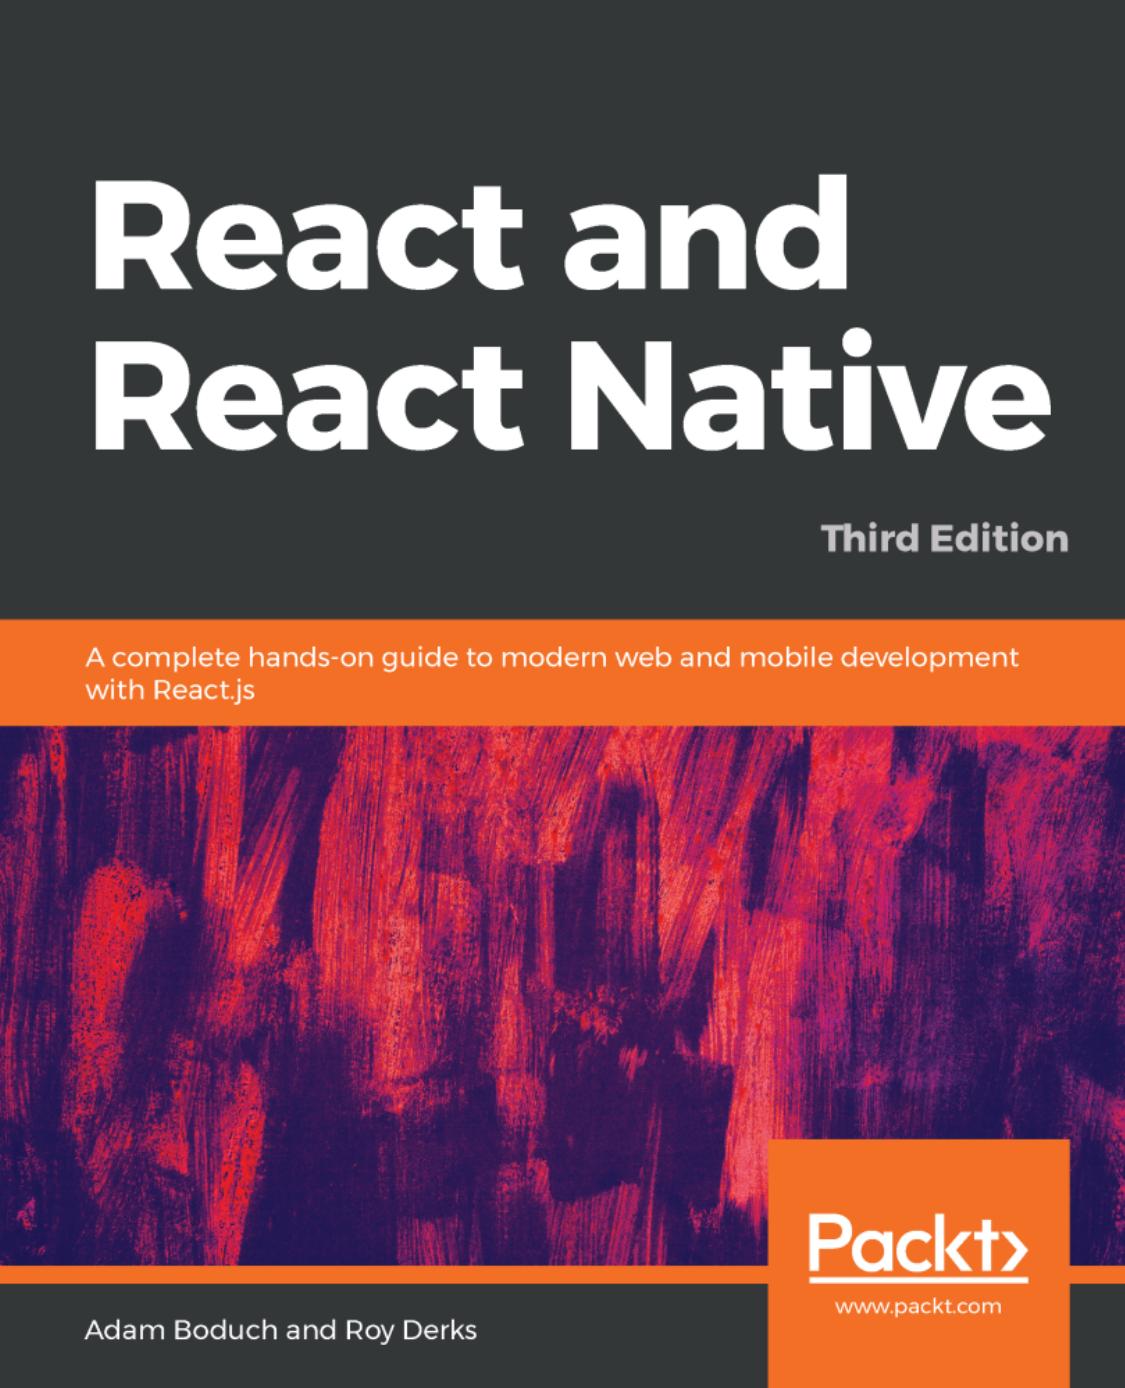 React and React Native: A Complete Hands-On Guide to Modern Web and Mobile Development With React.js - Third Edition